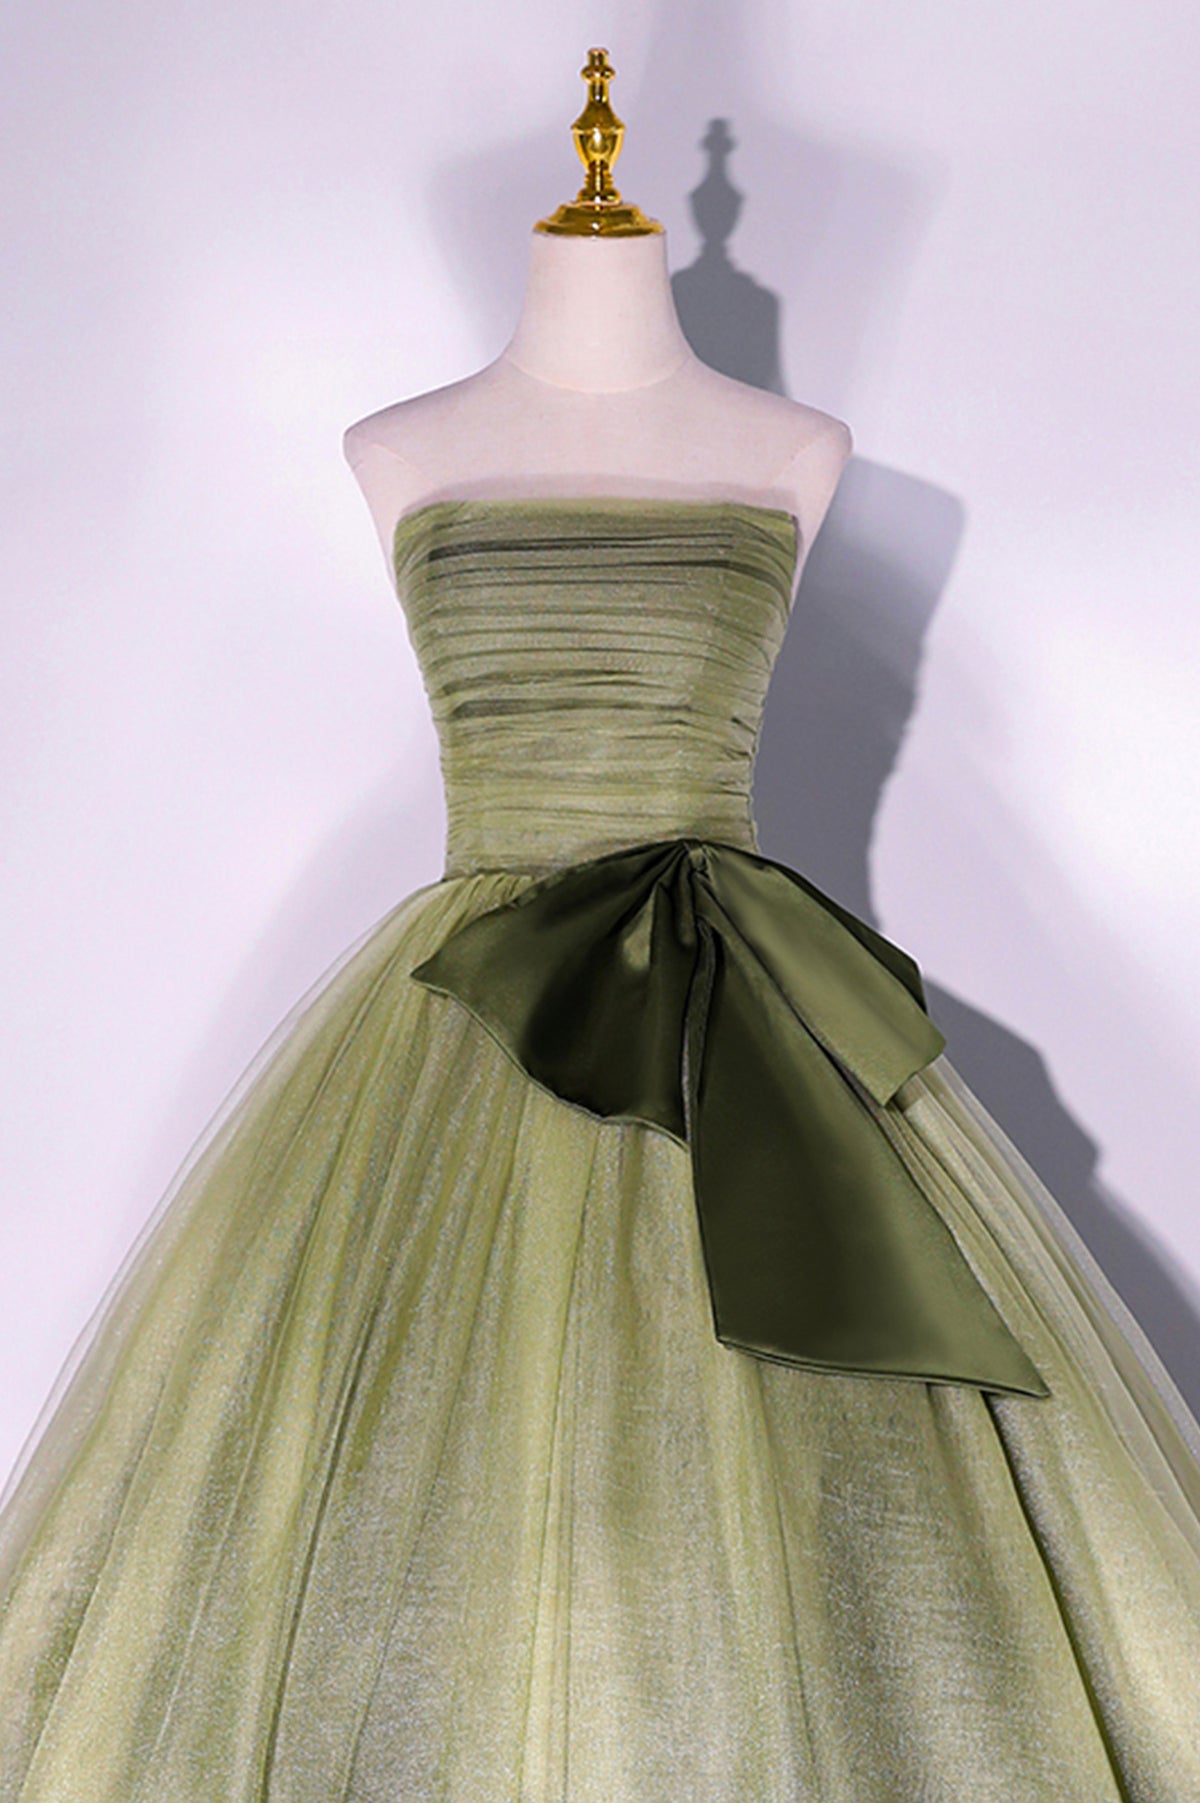 Green Tulle Long A-Line Prom Dress, Green Strapless Evening Gown